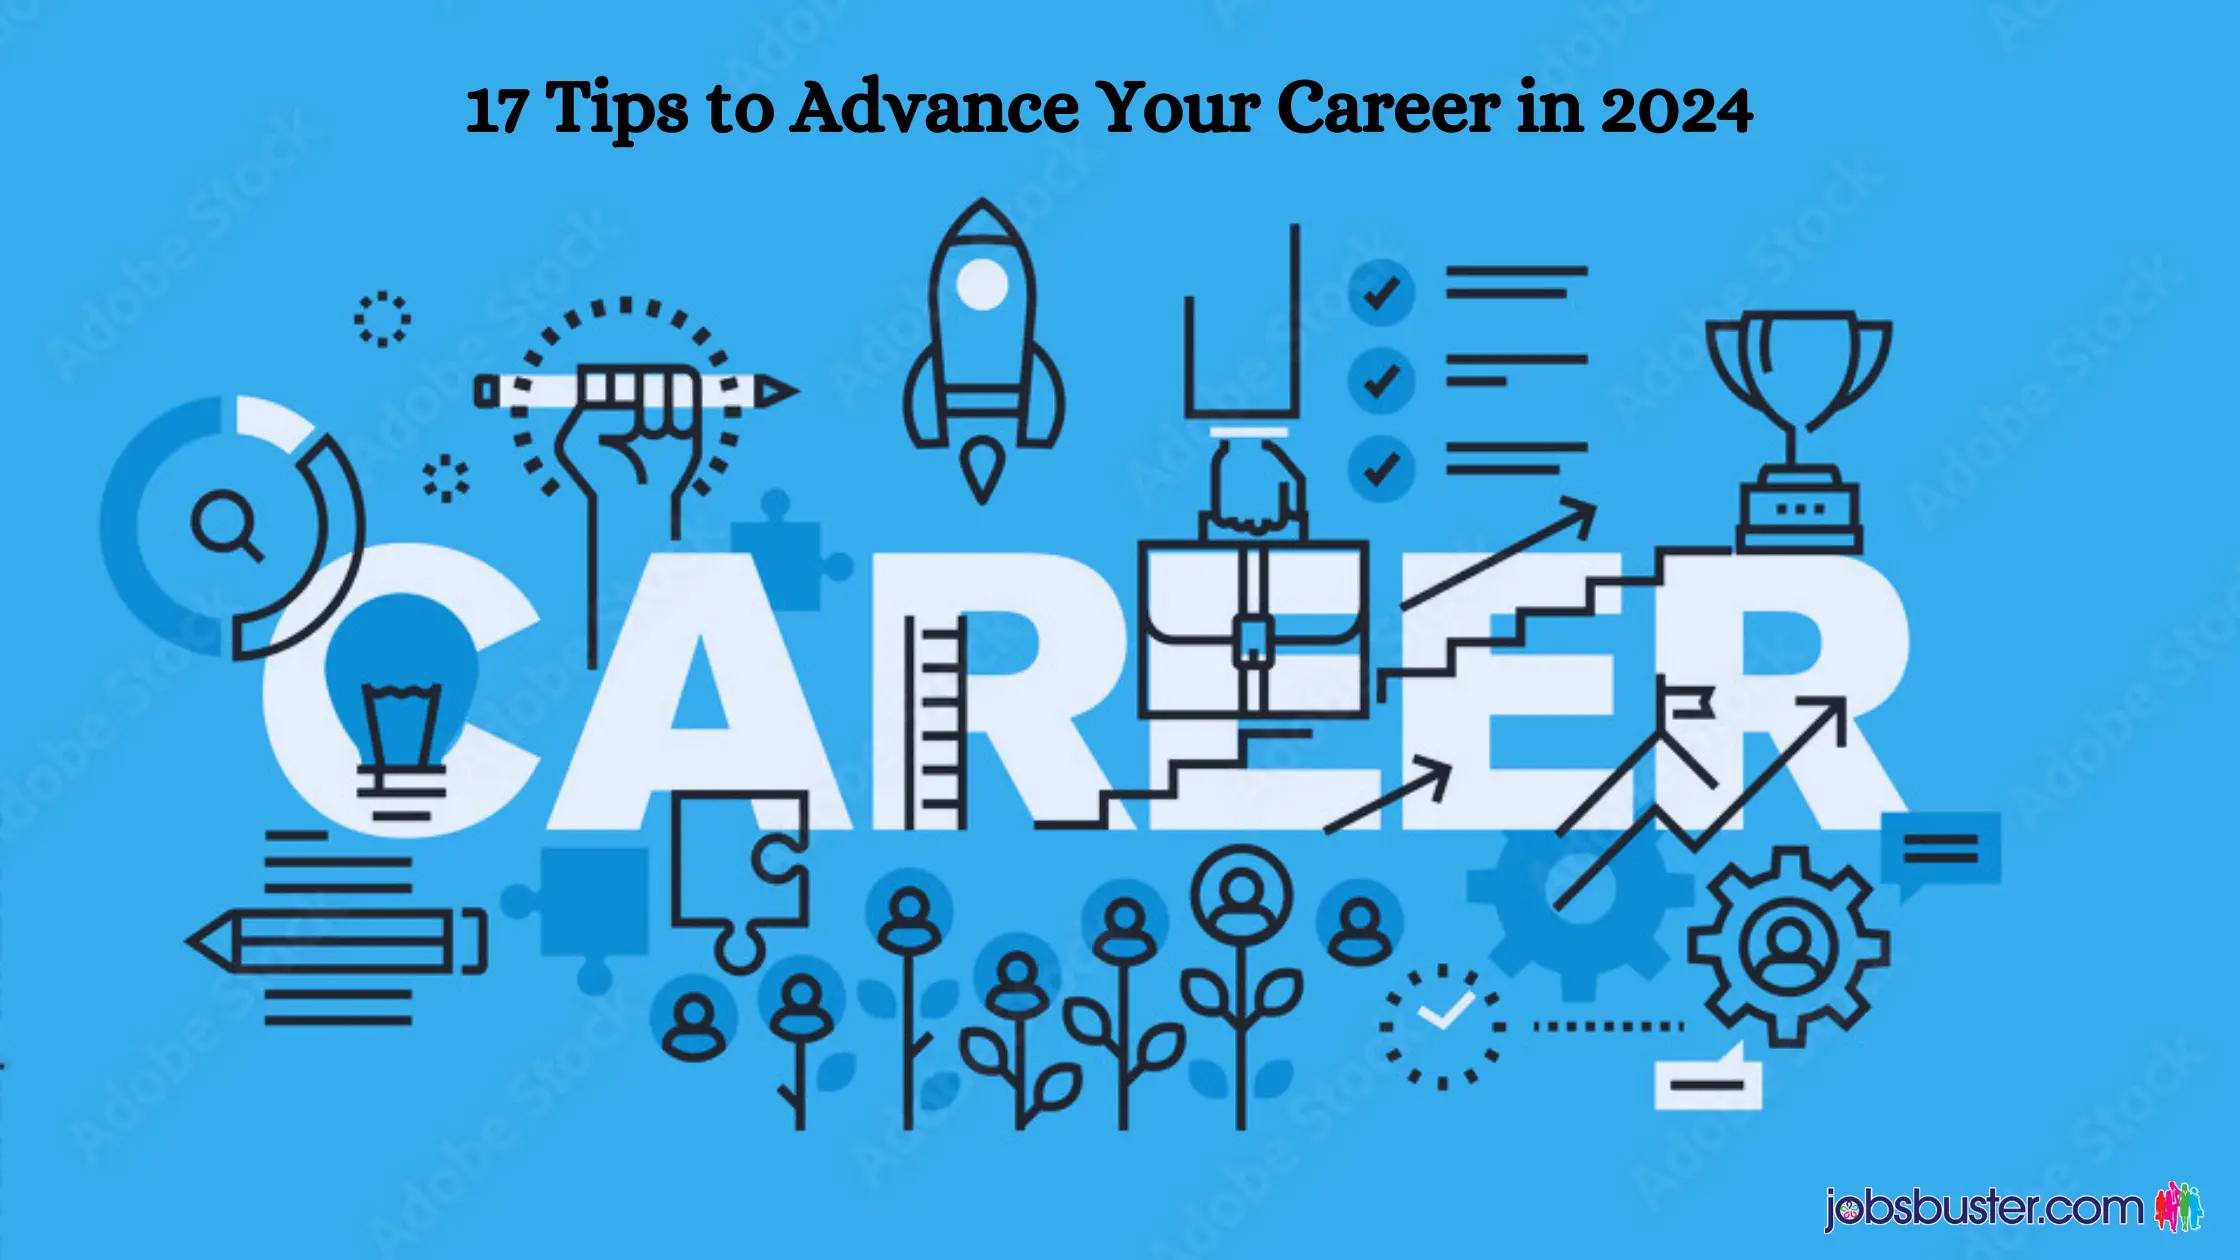 17 Tips to Advance Your Career in 2024